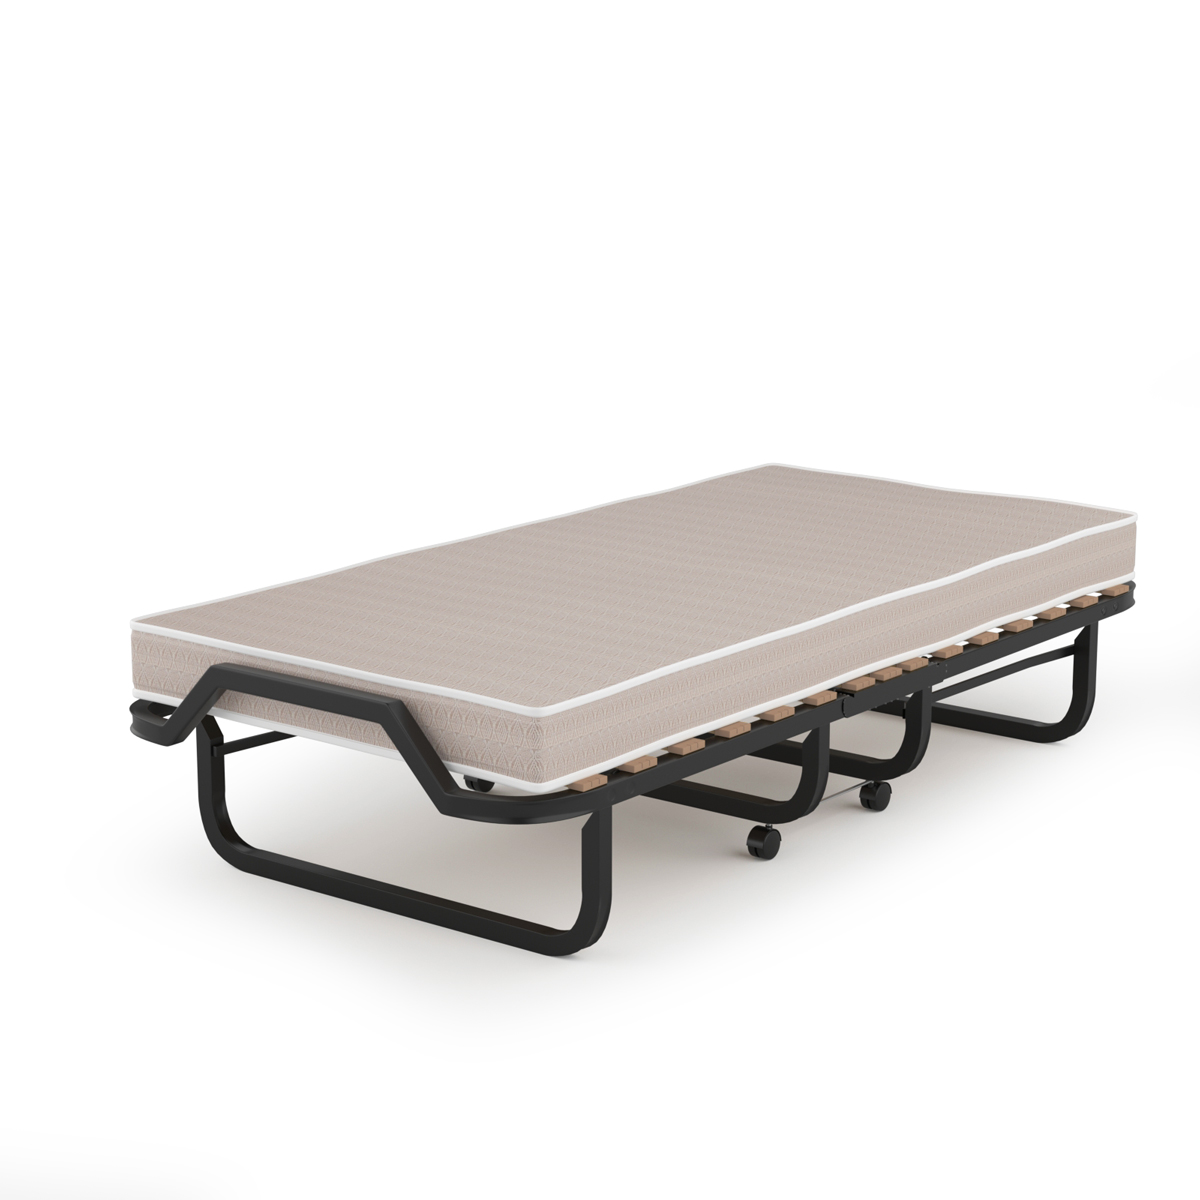 Costway Folding Bed Rollaway Guest Bed w/ Memory Foam Sturdy Metal Frame & Foam Mattress, Made in Italy (Product Dimensions: 79L x 31.5W x 16 H inch) - image 3 of 7